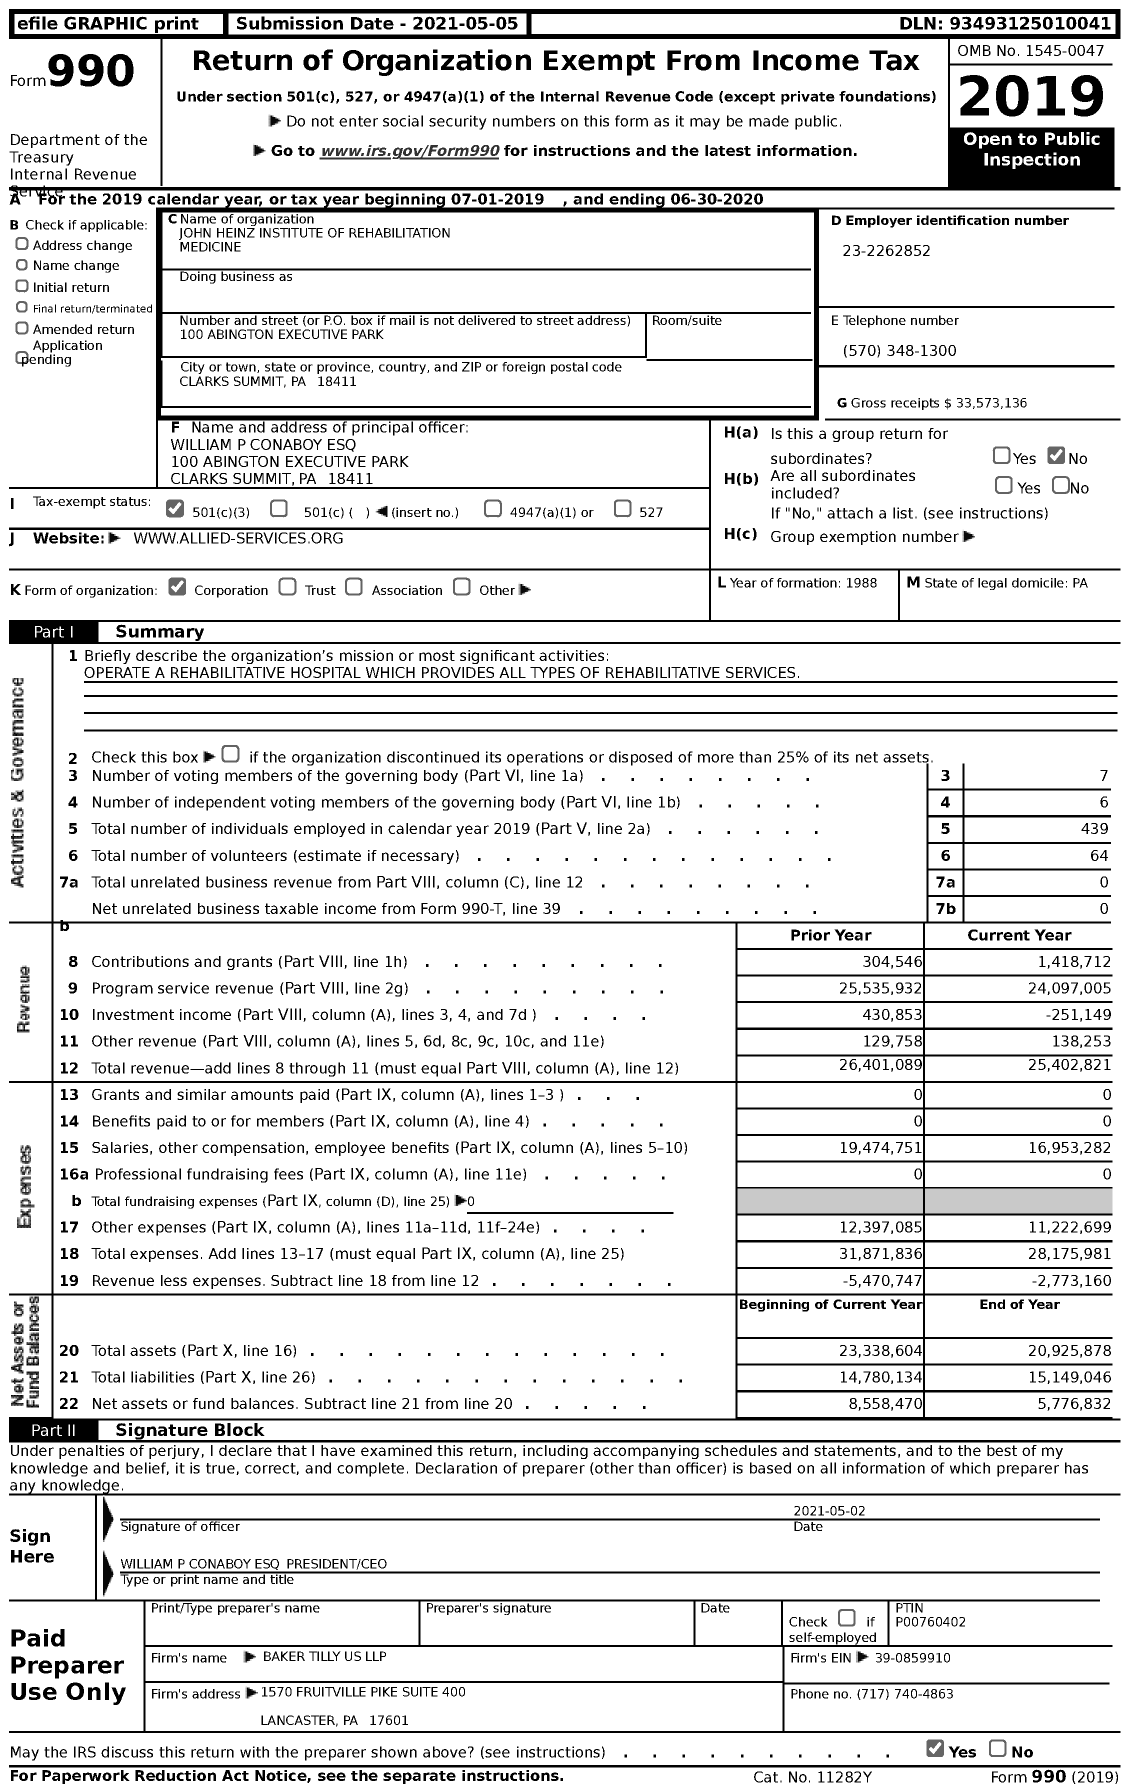 Image of first page of 2019 Form 990 for John Heinz Institute of Rehabilitation Medicine